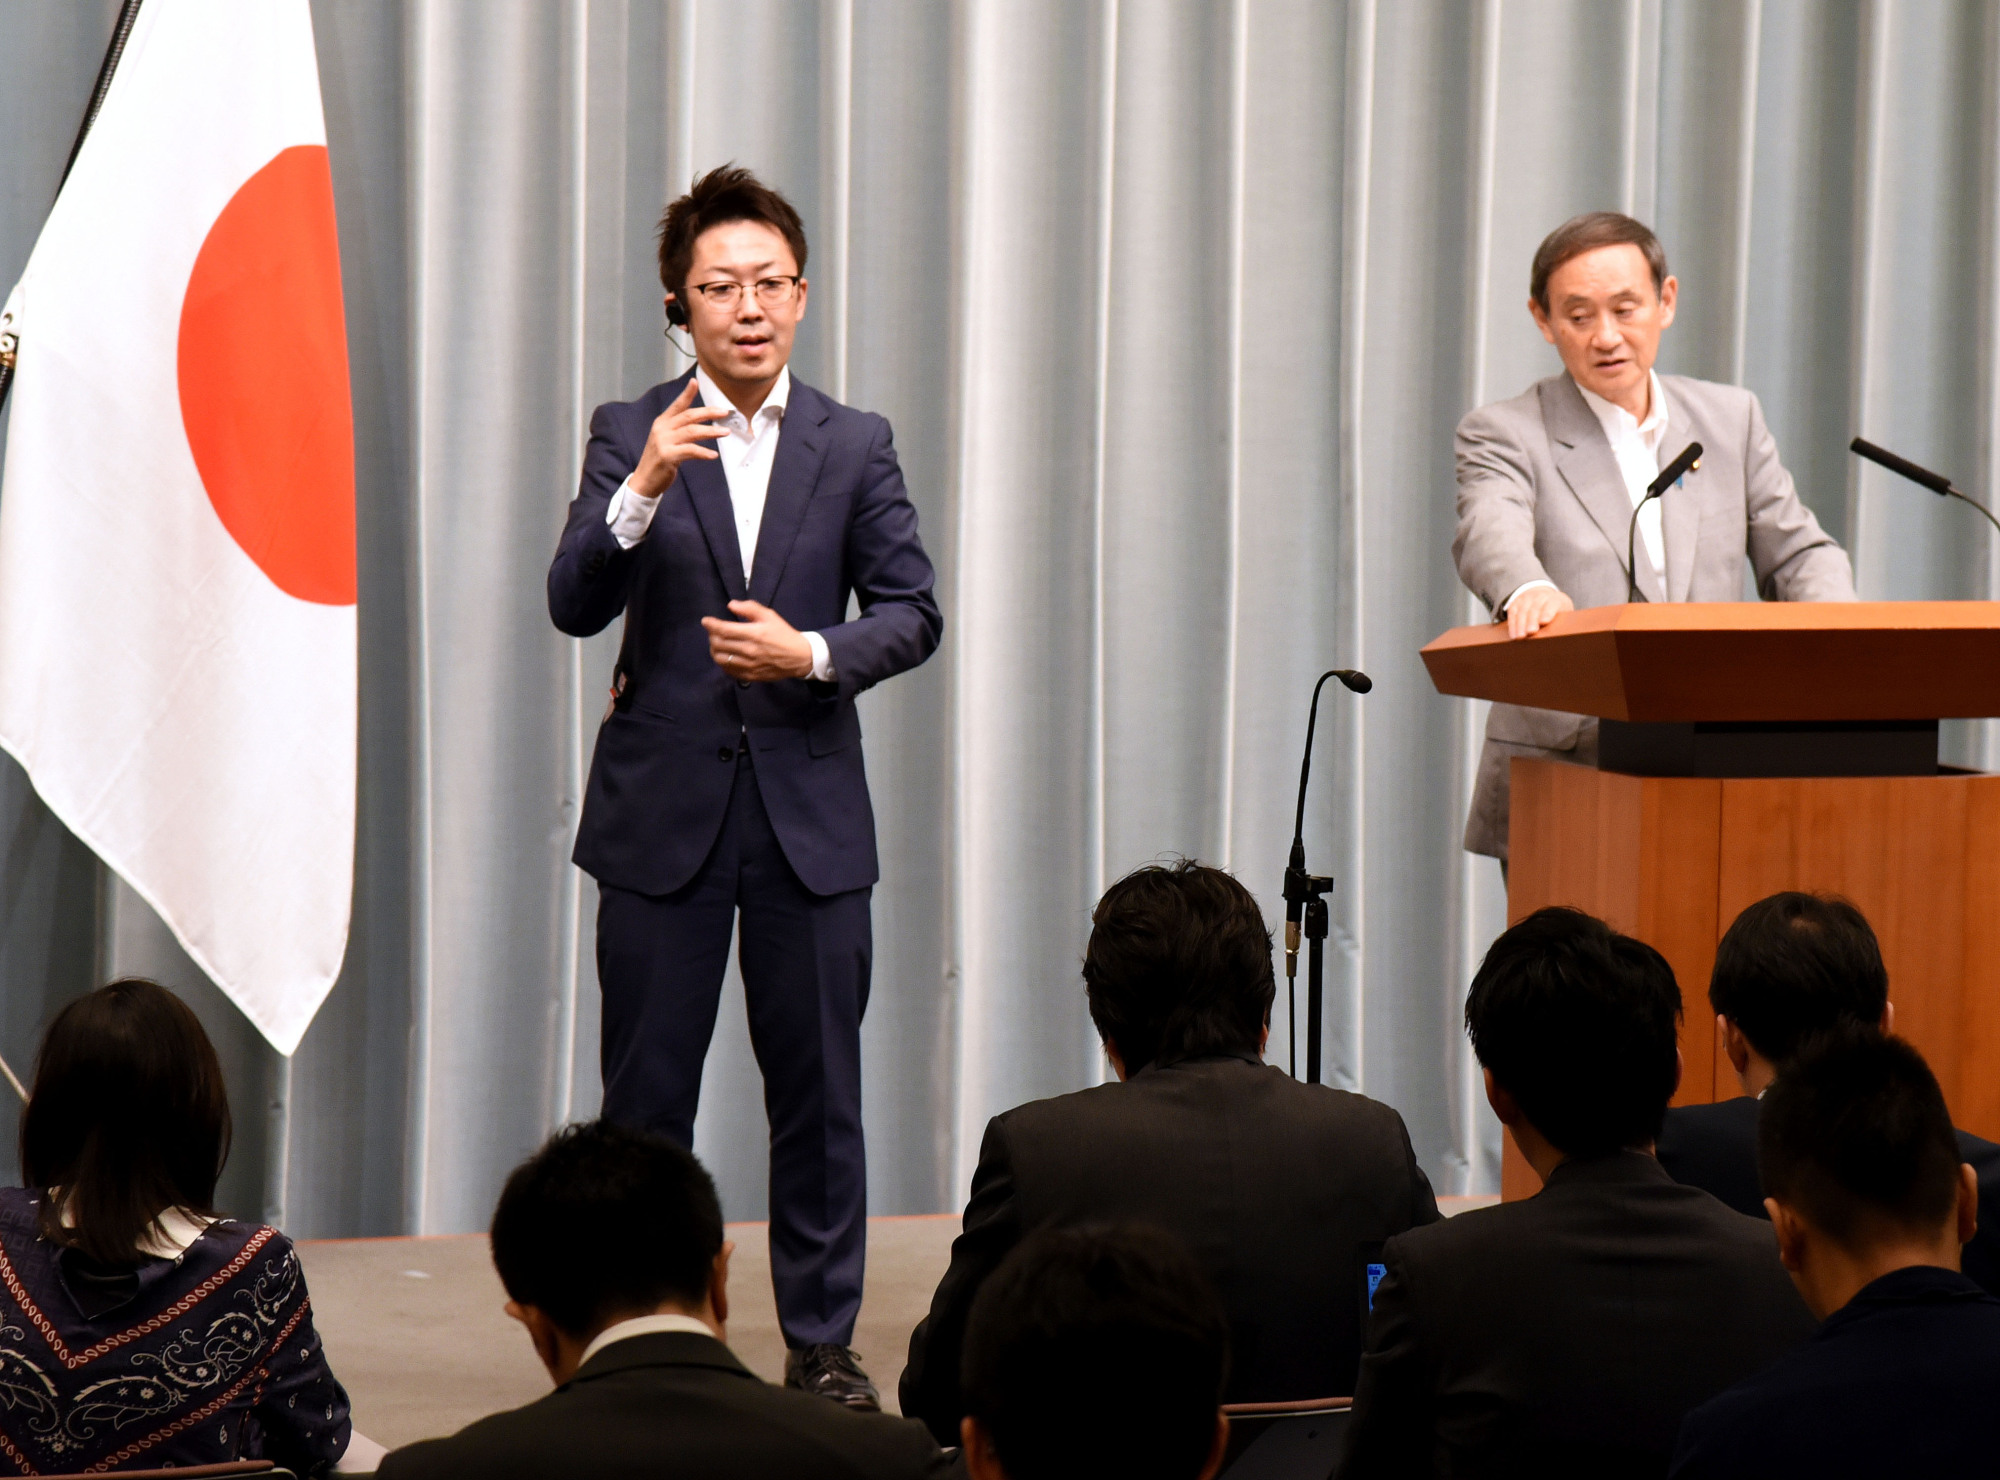 Kohei Ehara, a sign language interpreter, works beside Chief Cabinet Secretary Yoshihide Suga during a news conference at the Prime Minister's Office in Tokyo on June 20. | SATOKO KAWASAKI